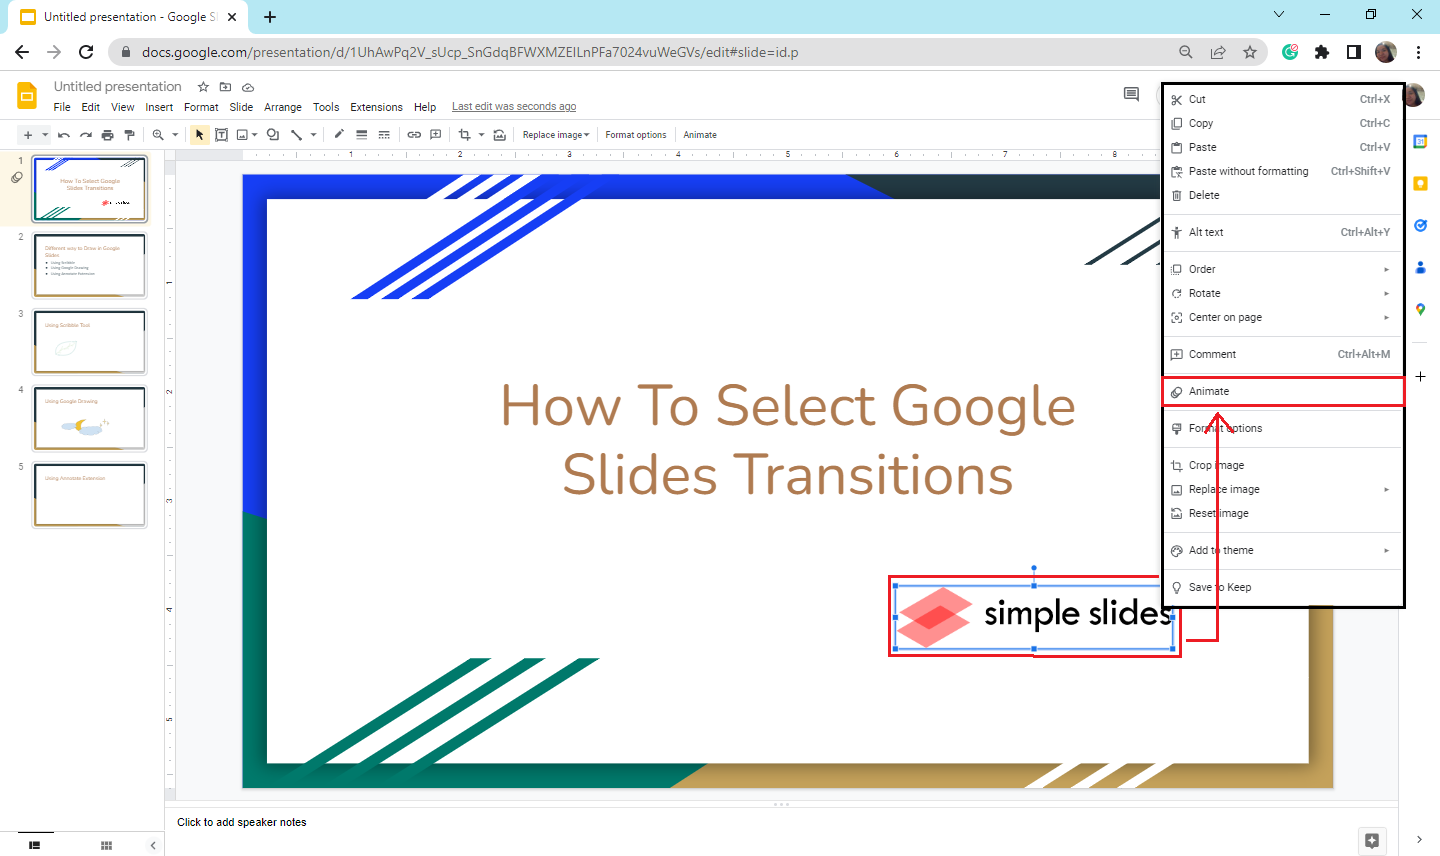 in the exisitng Google Slides, right-click the desired object you want to apply an animation.